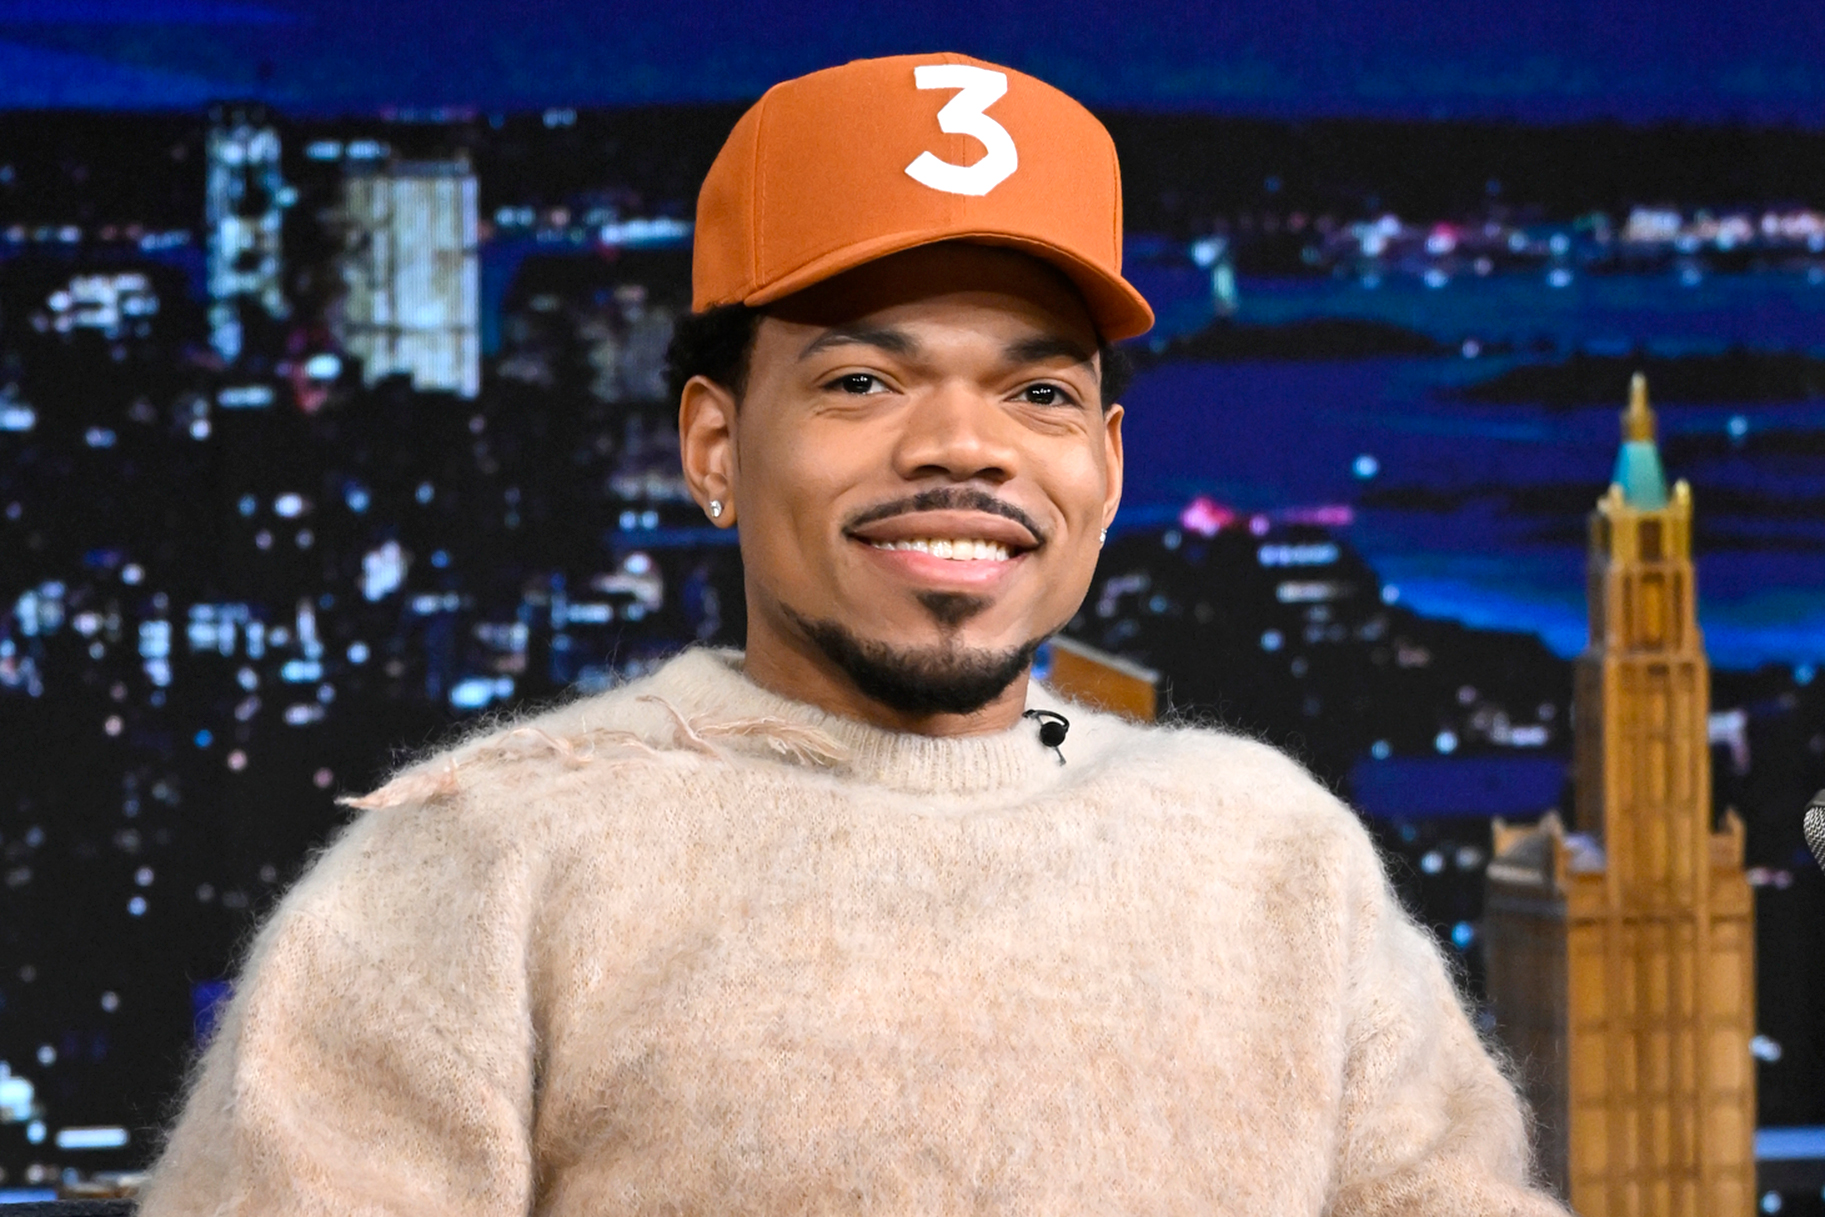 Chance The Rapper wears his 3 Hat